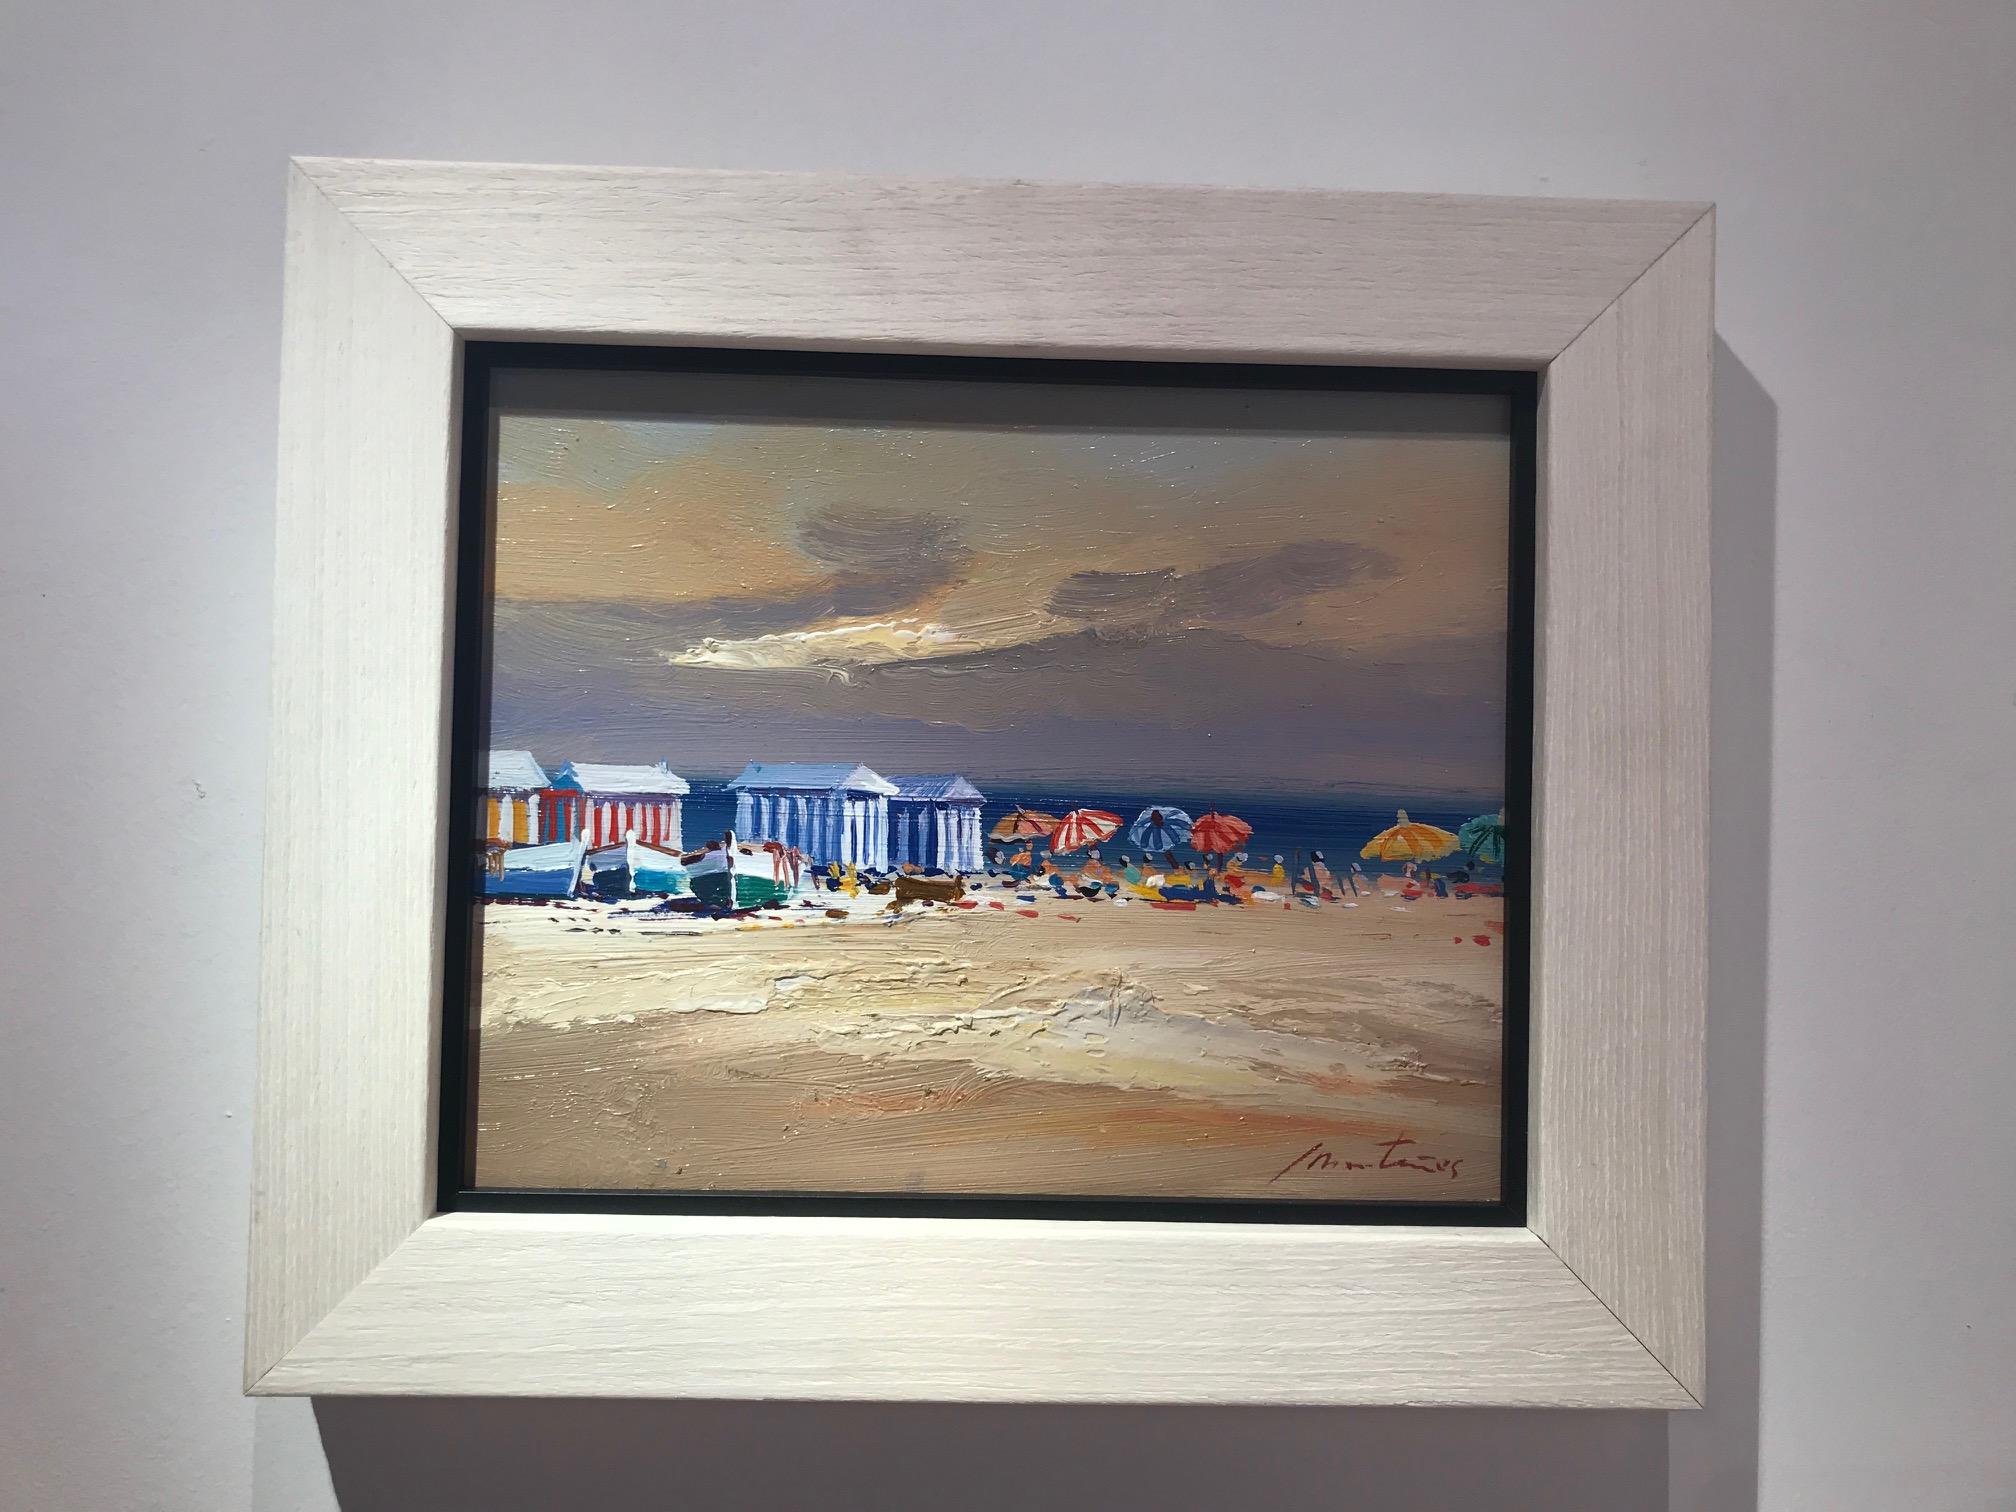 A warm and beautiful contemporary beach scene 'Beach Huts' by E. Martinez. This stunning seascape has a soft and natural colour palette, pale blues and earthy cool tones are subtle and mellow. Interesting textures create a warm and balanced